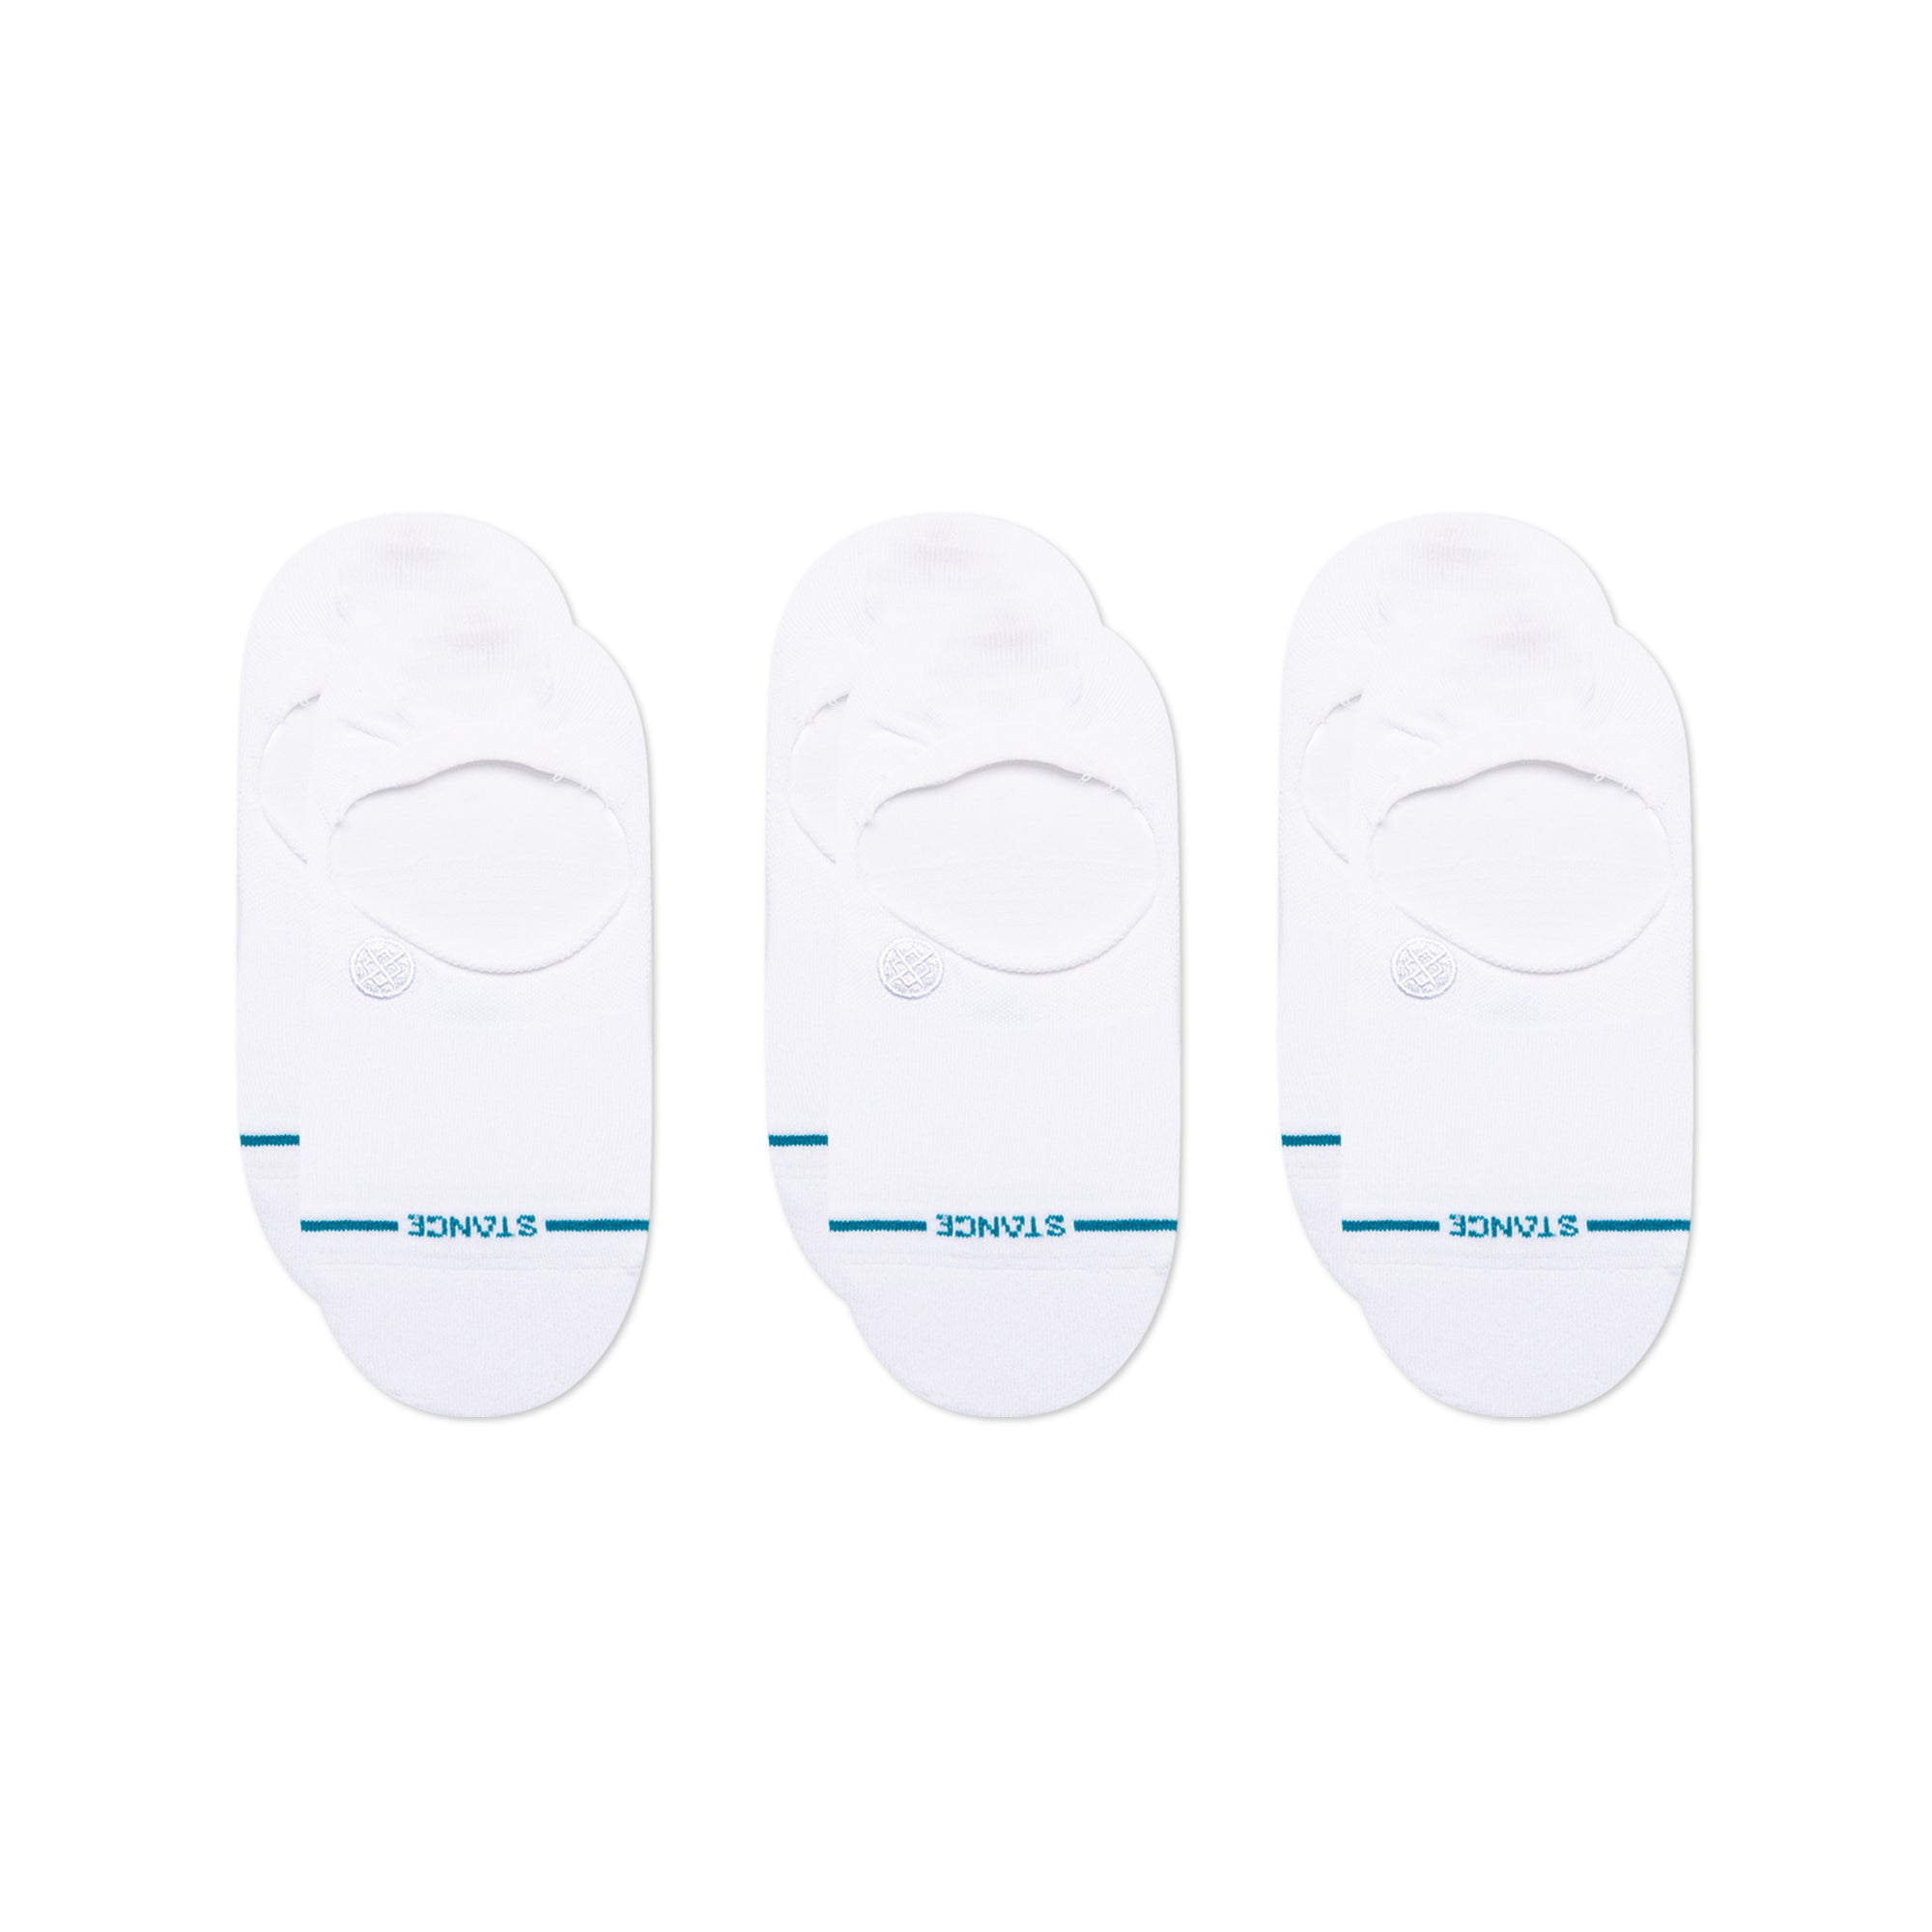 Stance No Show 3 Pack - White